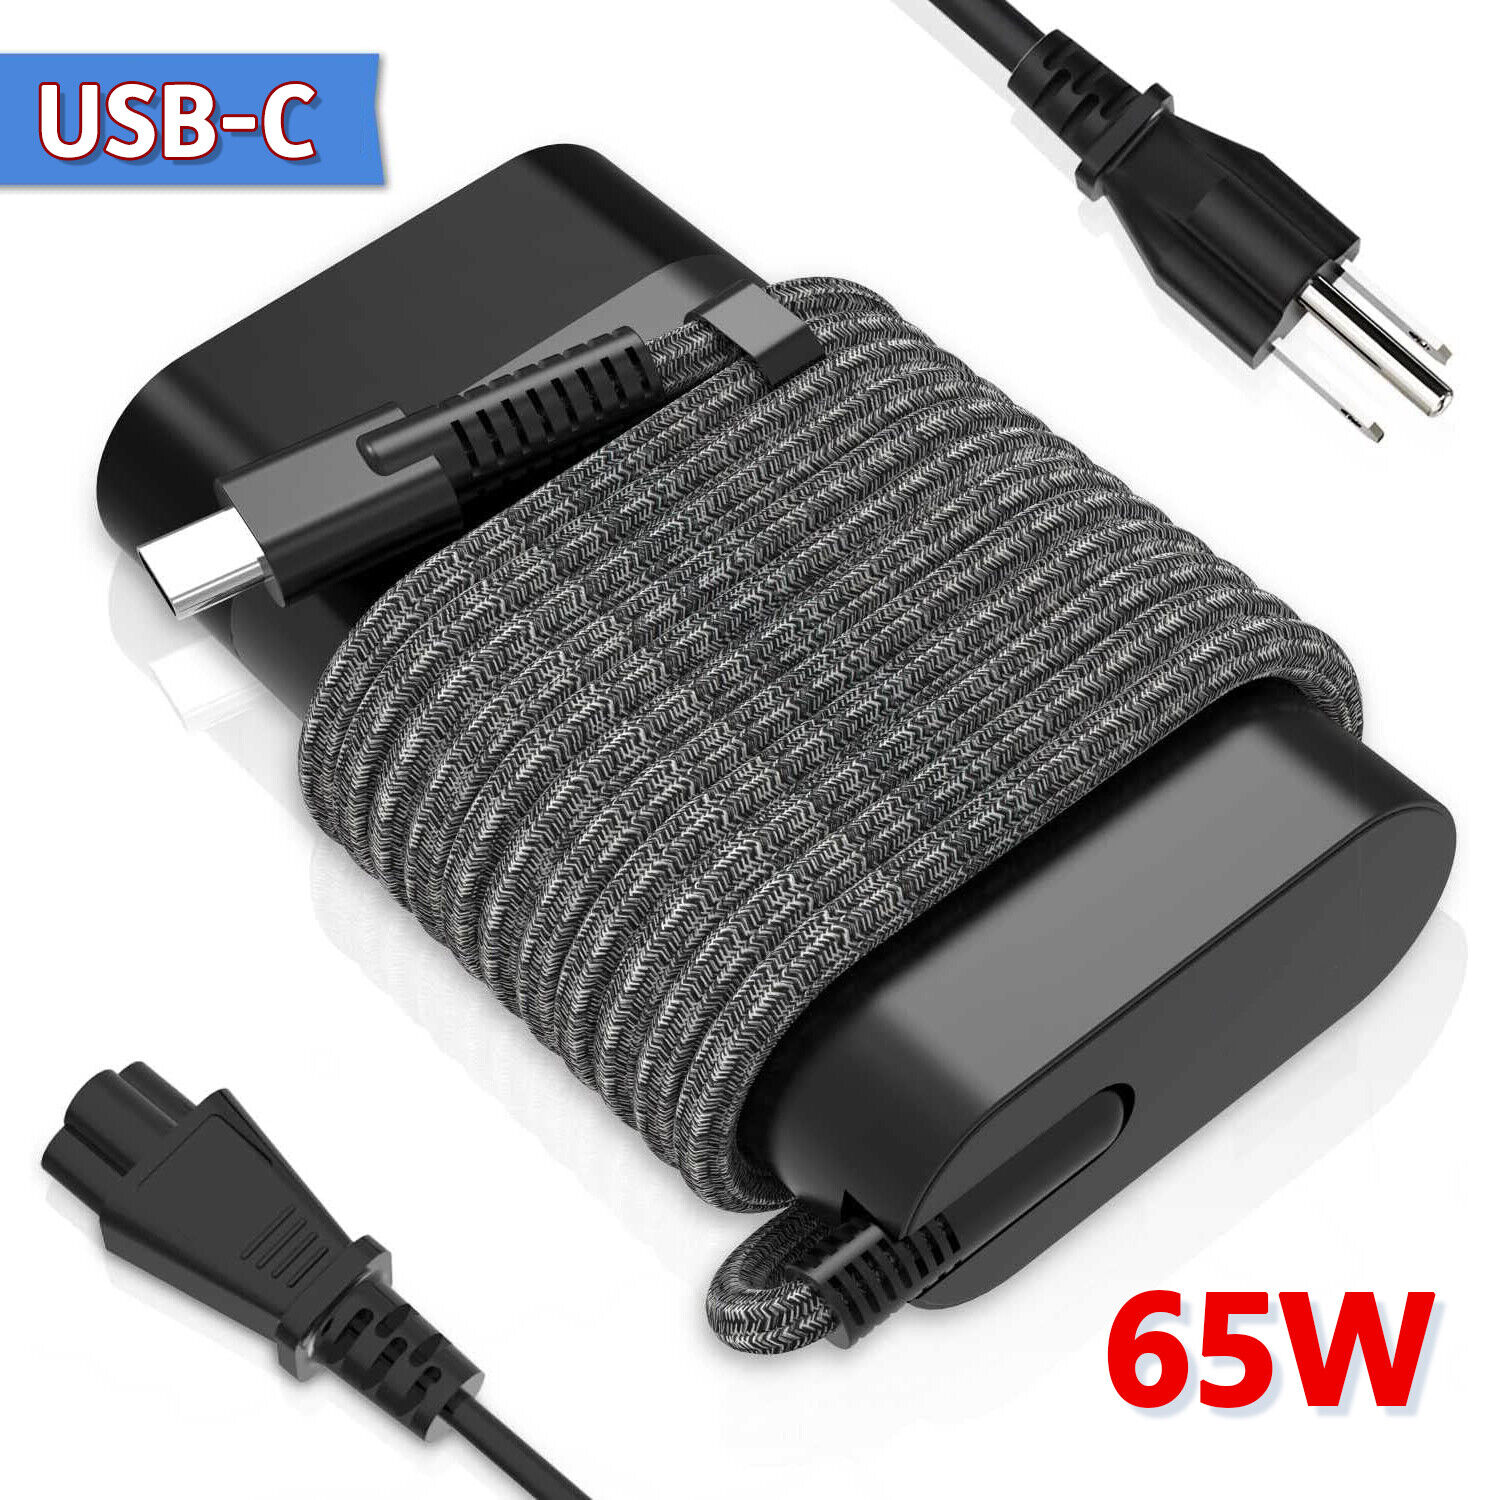 Slim HP 65W USB-C Laptop Charger Power Adapter for HP Spectre x360 Elitebook 840